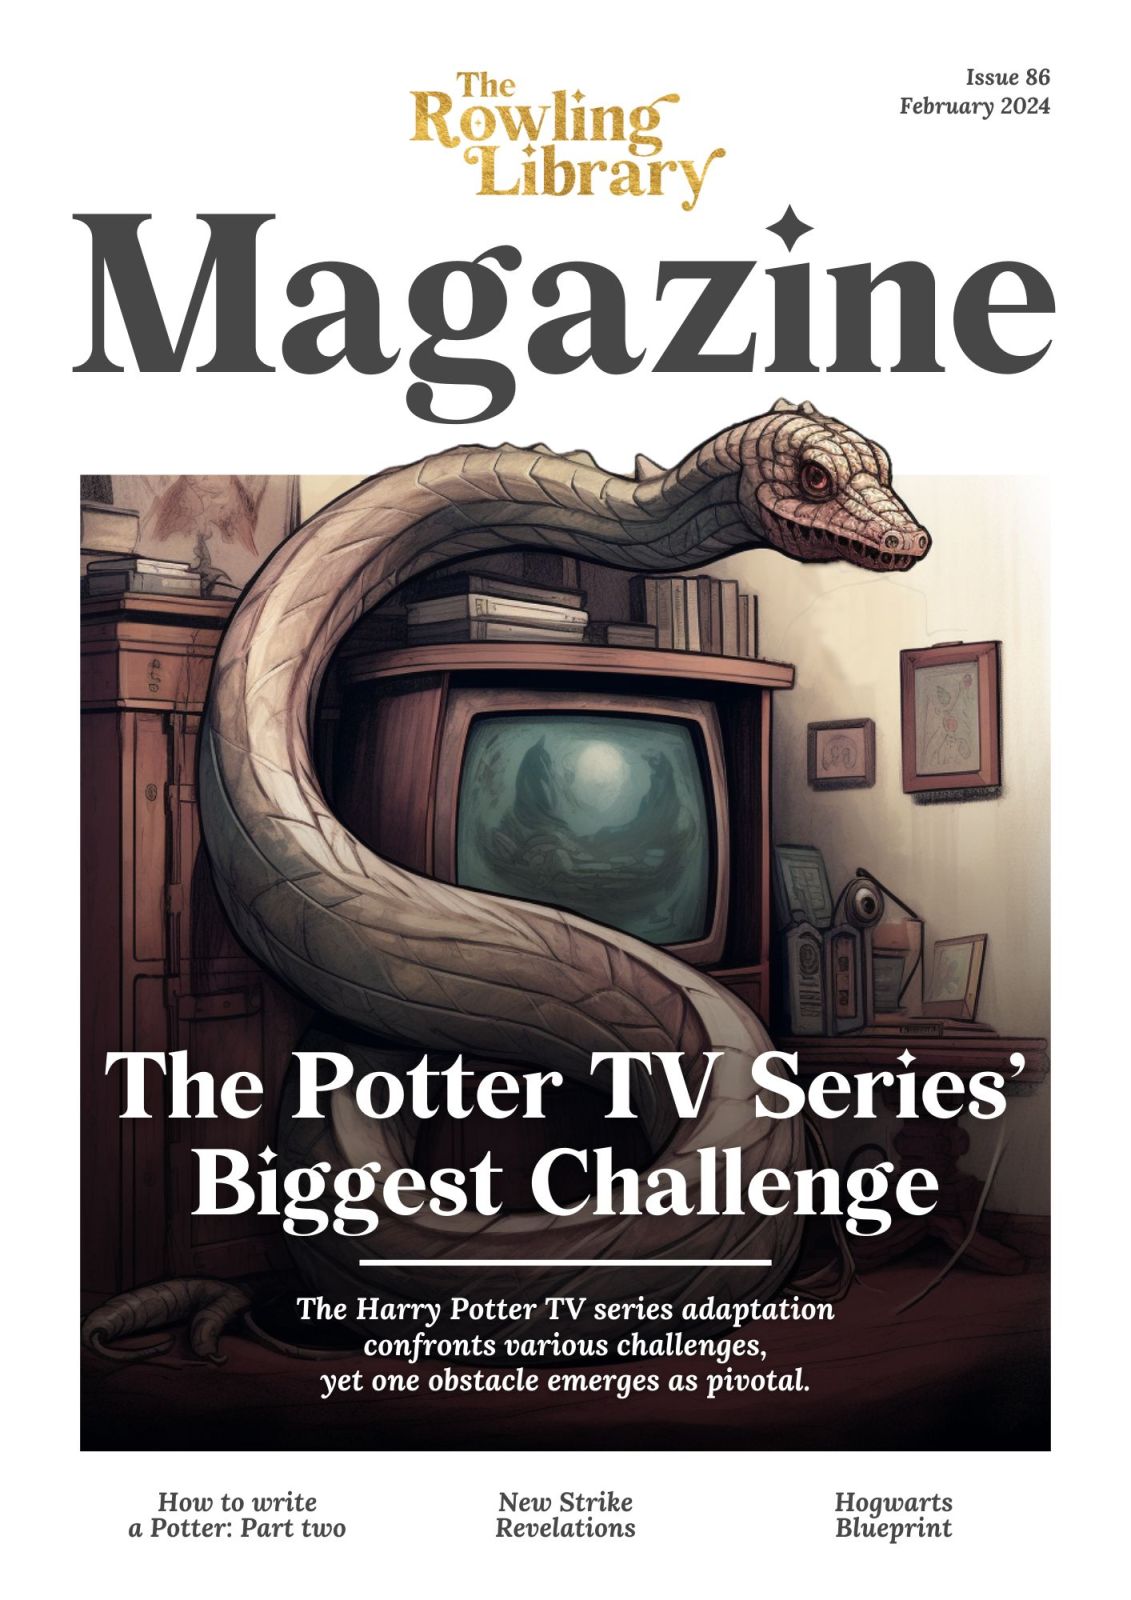 The Rowling Library Magazine #86 (February 2024): The Potter TV Series' Biggest Challenge